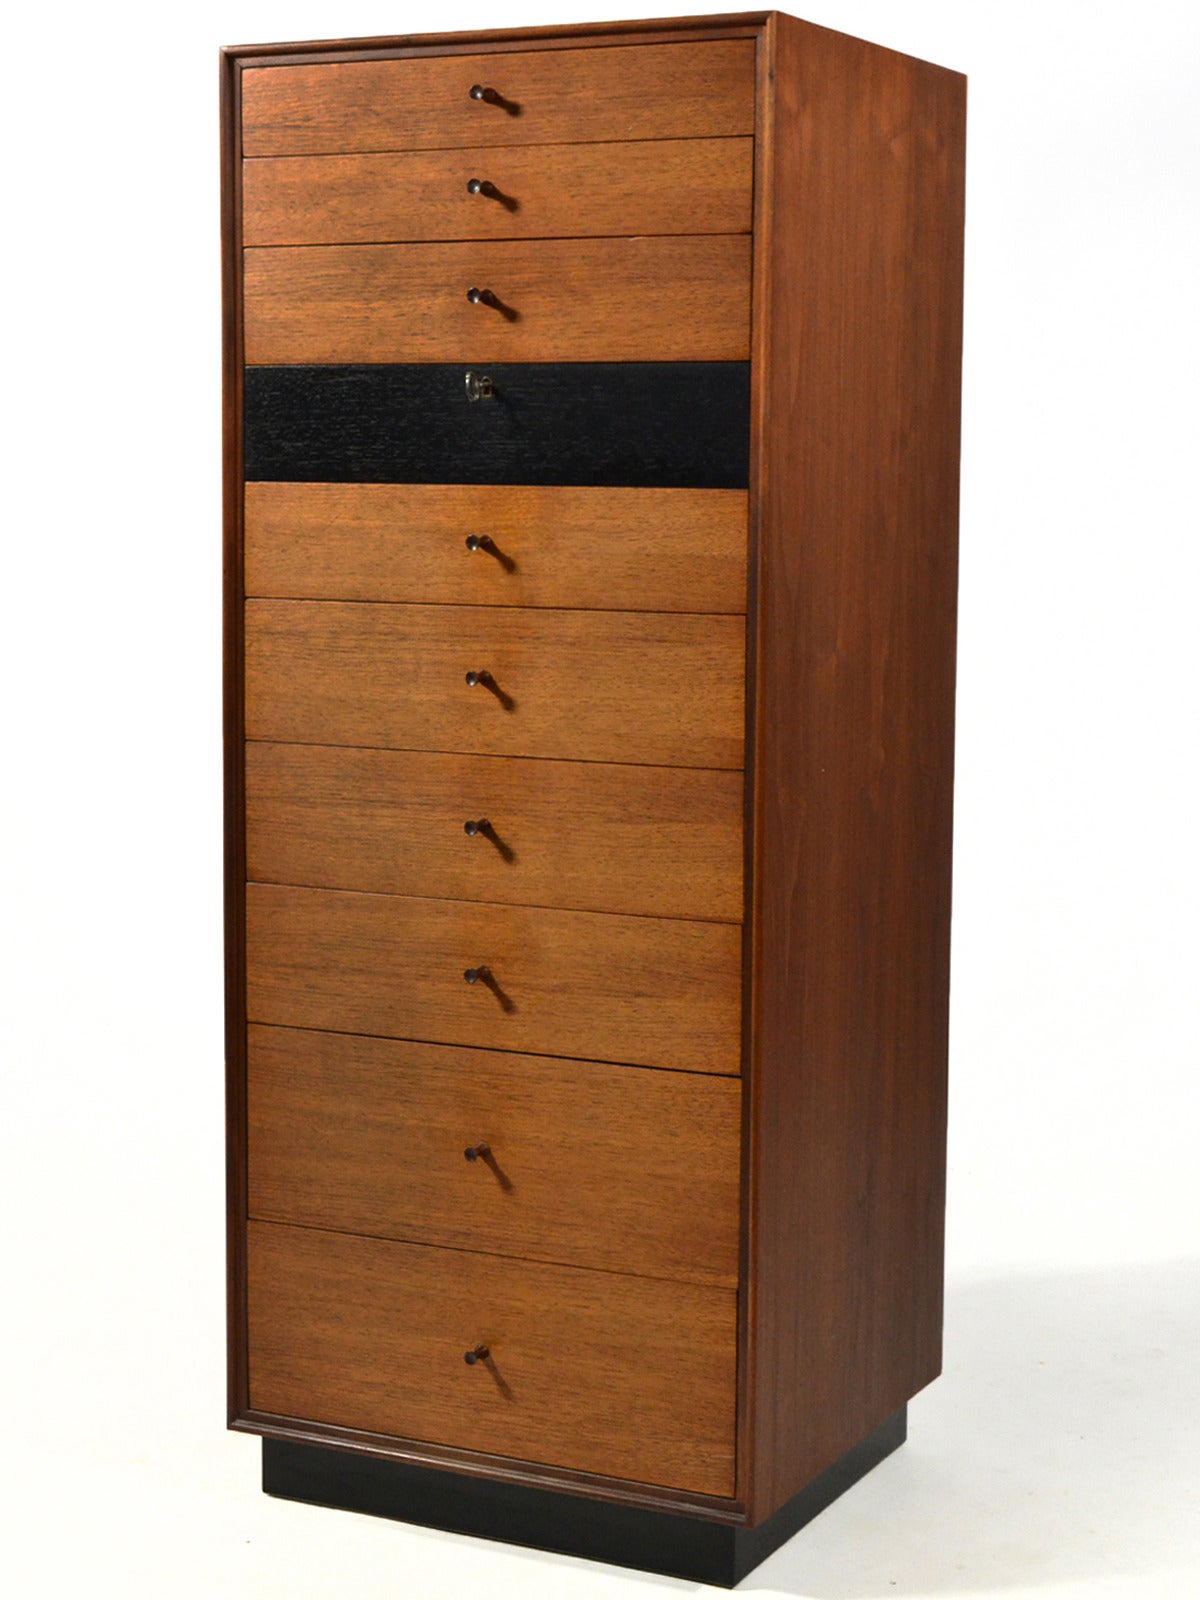 Designed by Stewart MacDougall and Kipp Stewart for Glenn of California, this stately and handsome ten drawer chest is also highly functional, perfect for the gentleman or lady. The scale of the piece allows it to fit nearly anywhere and the drawer